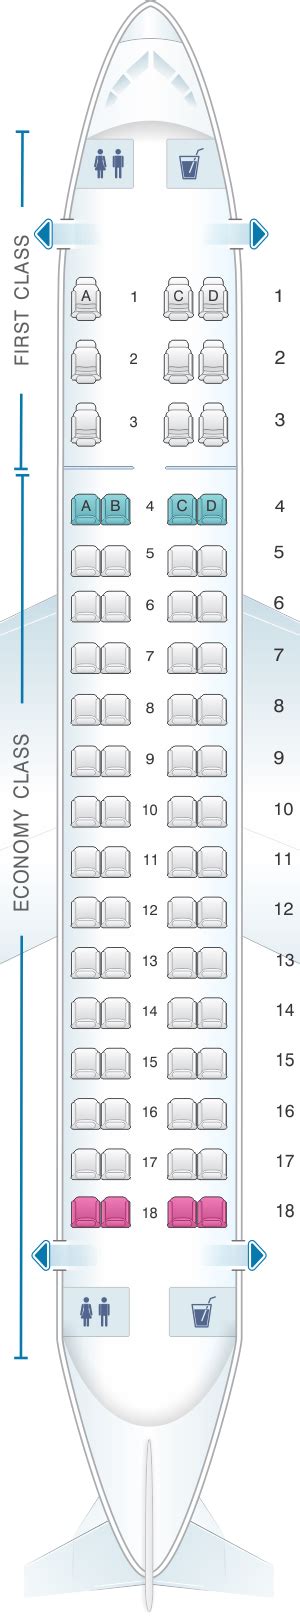 embraer 170 seat map american airlines